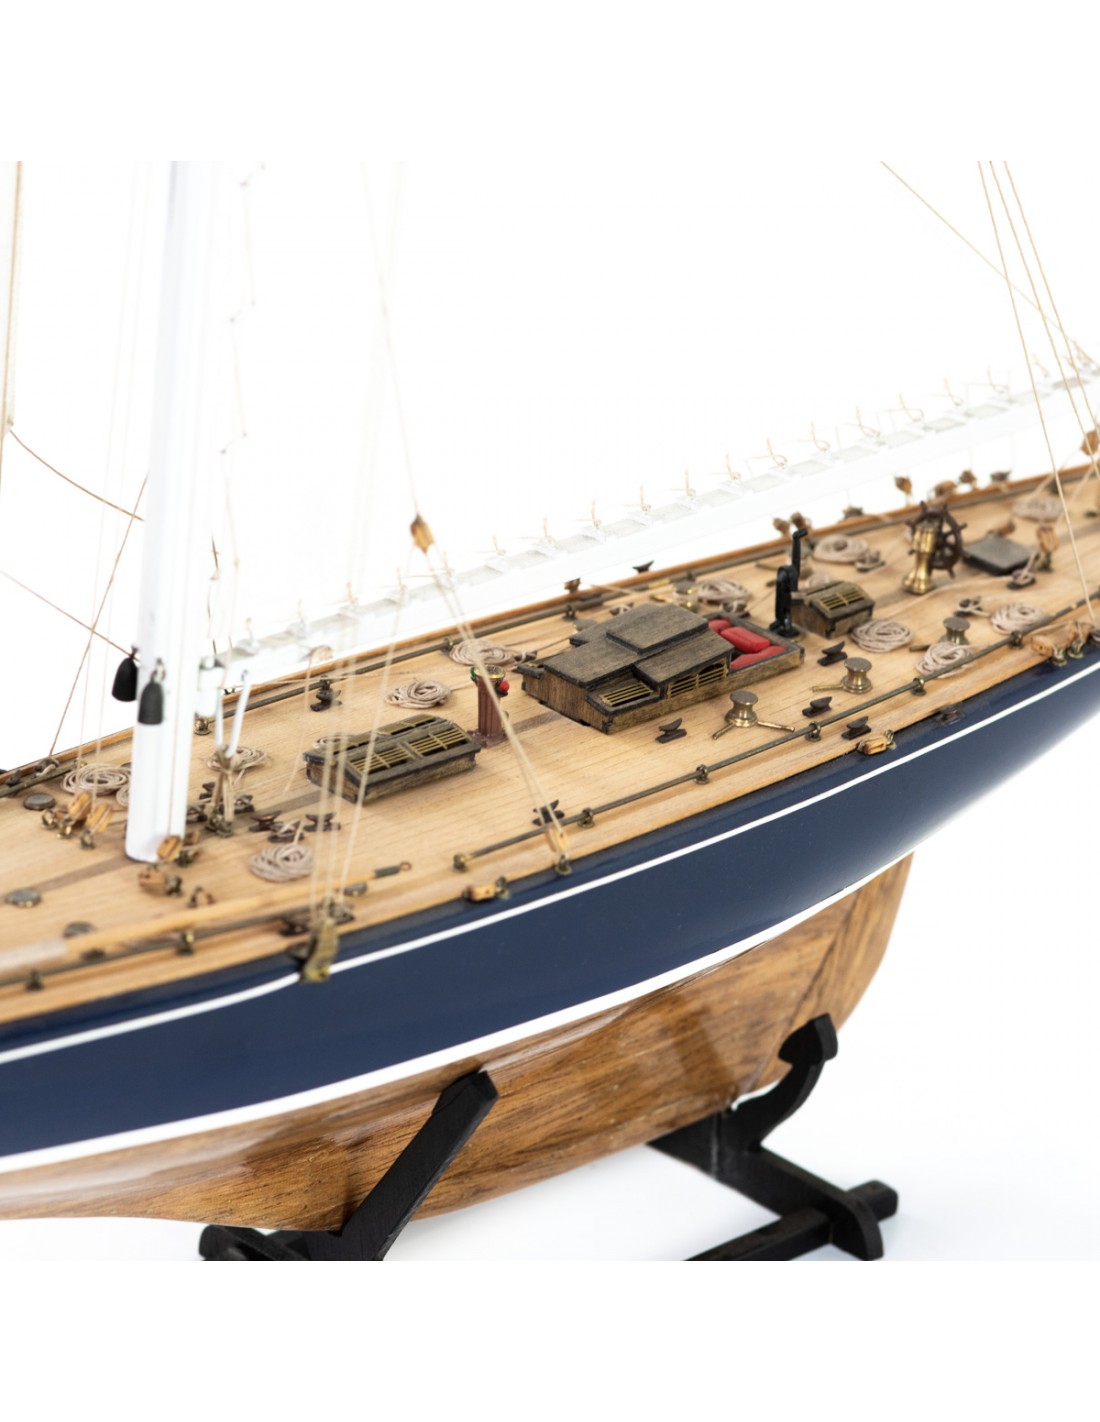 Amati Models - Endeavour 1:35 - America's Cup